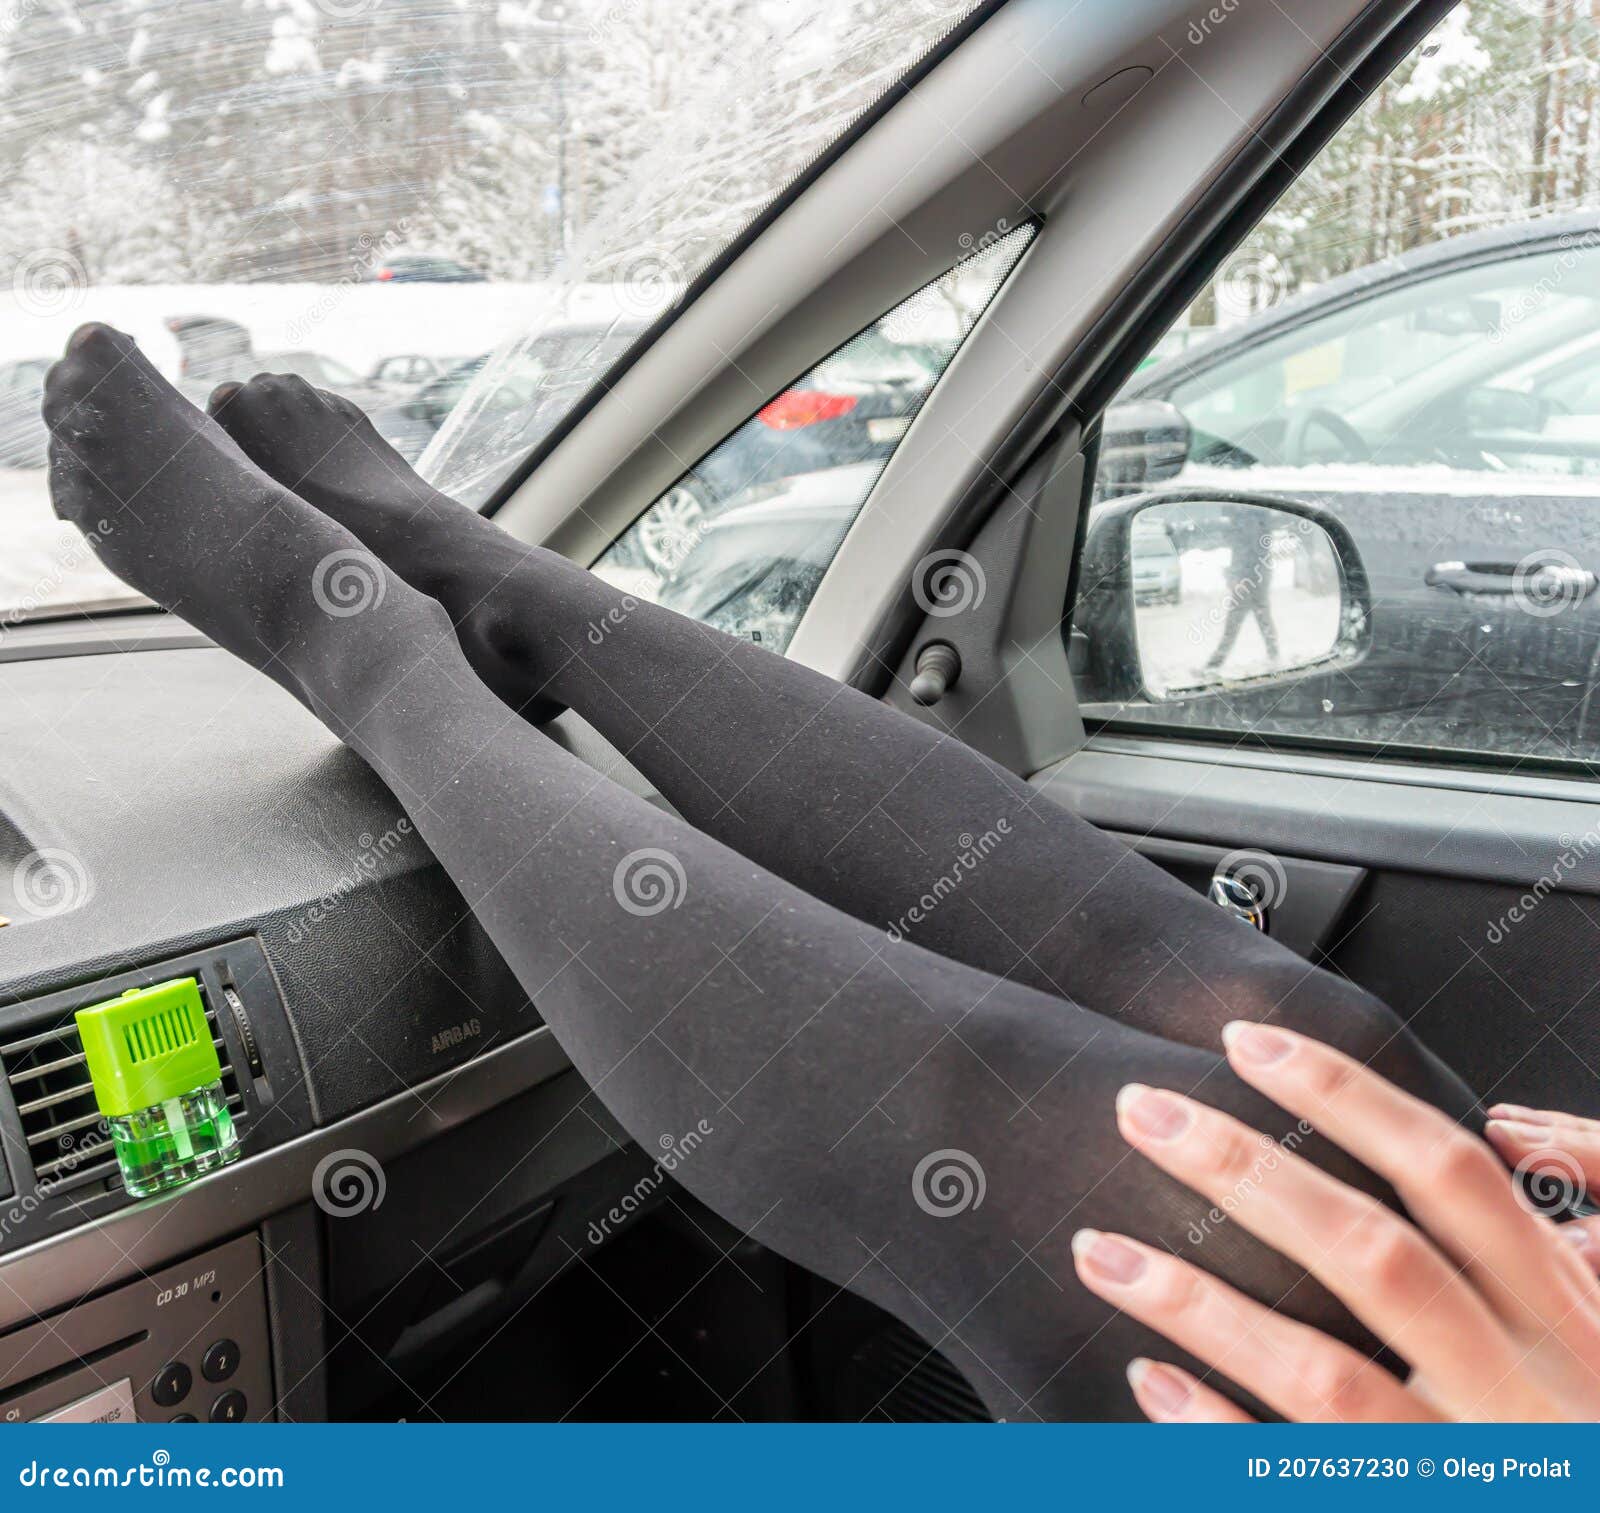 Mature women driving cars in pantyhose 245 Travel Pantyhose Photos Free Royalty Free Stock Photos From Dreamstime